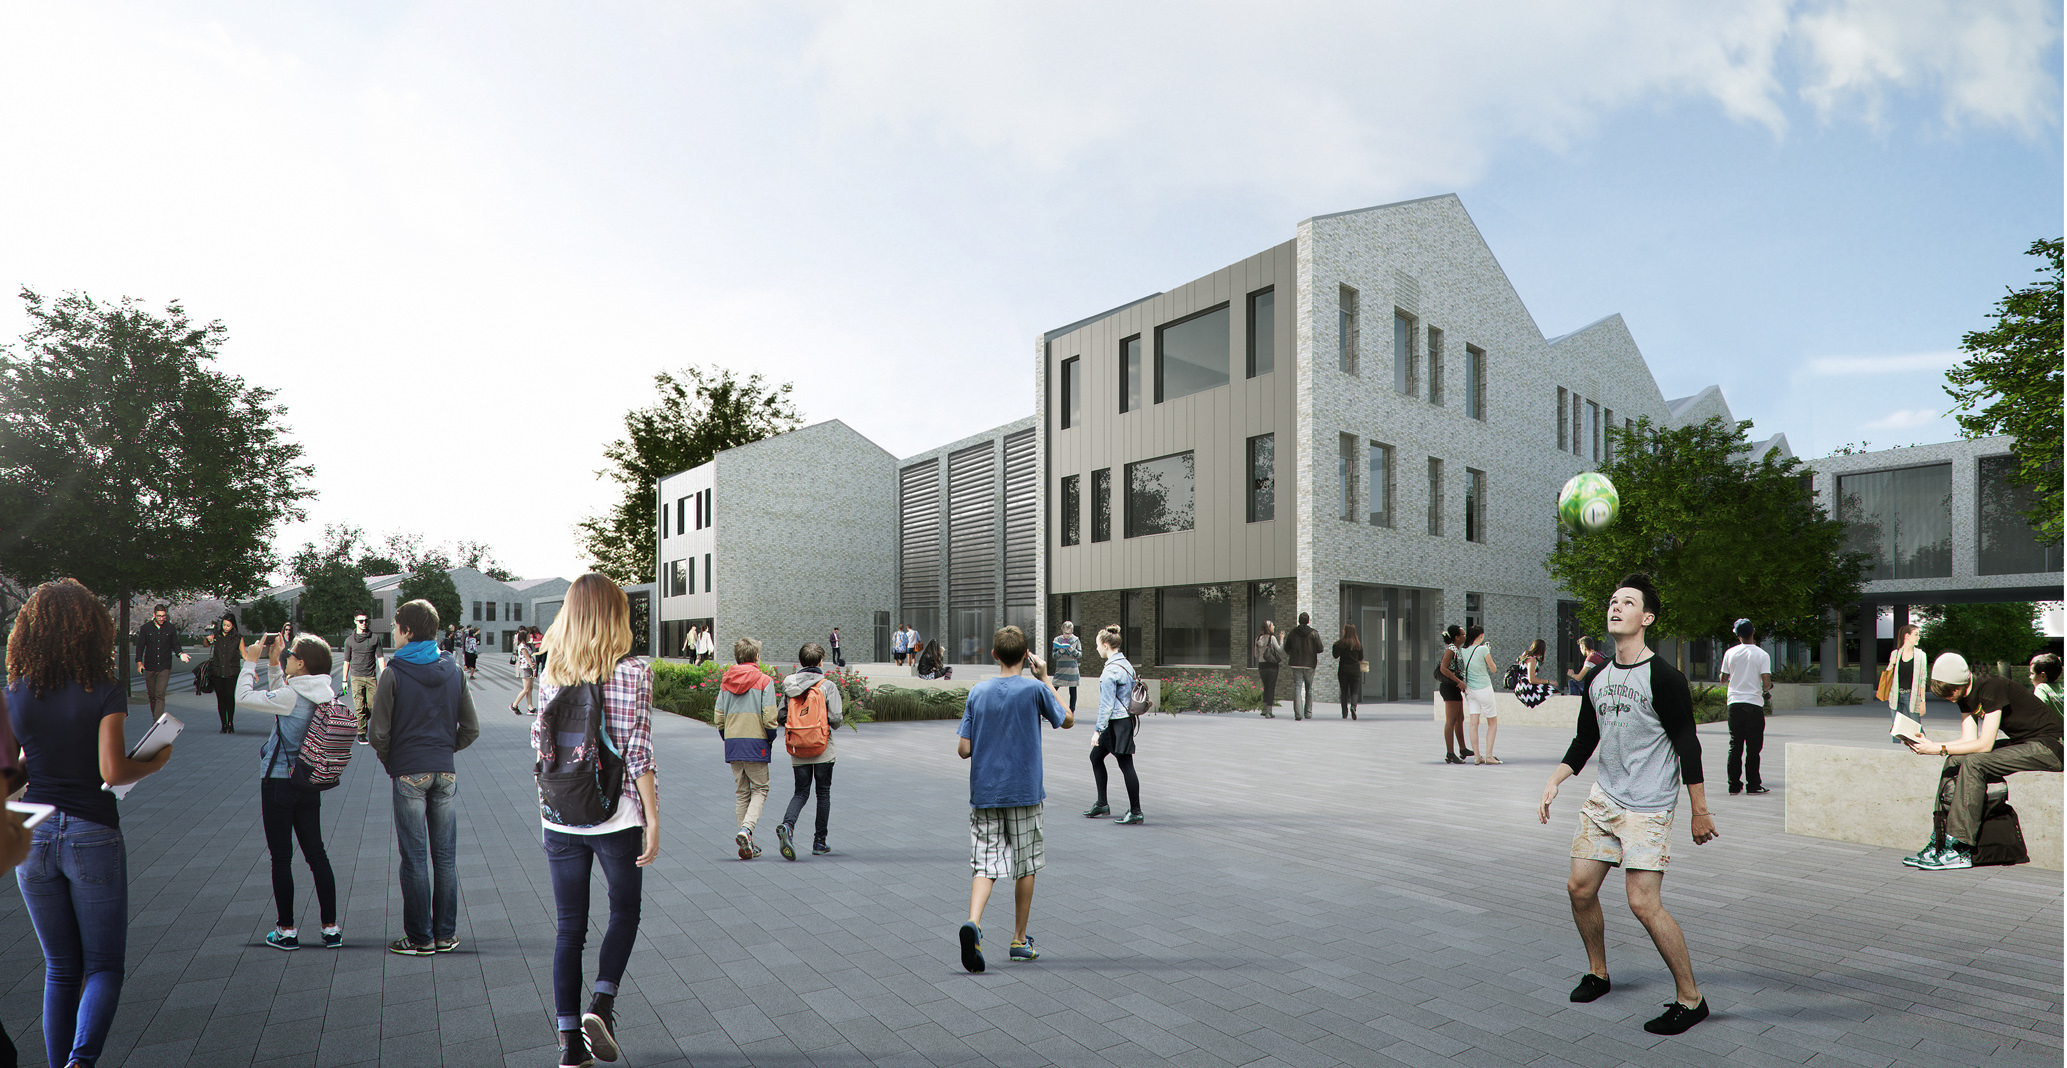 Deanestor to fit-out Barony Campus in contract worth over £1m